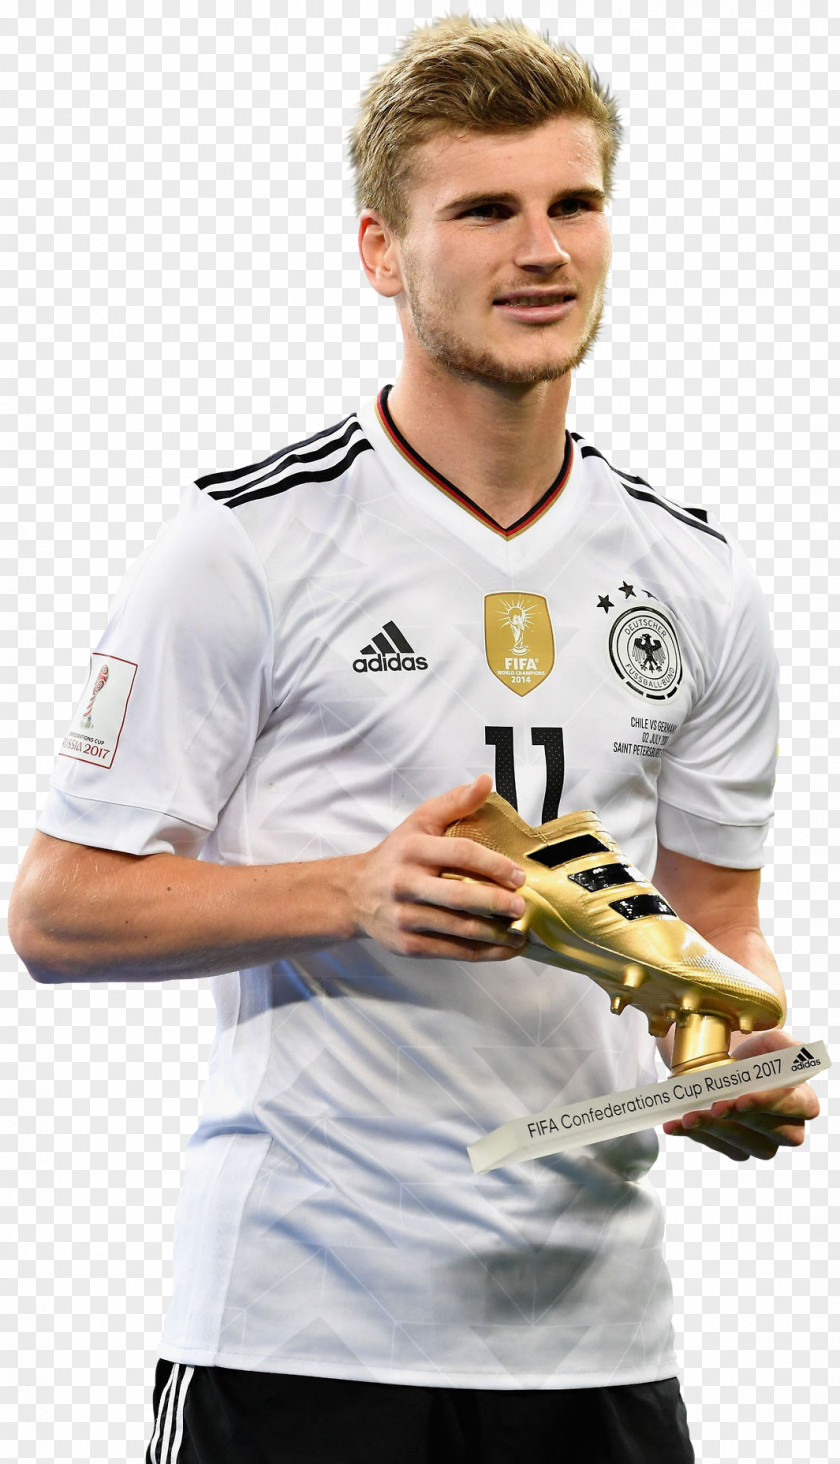 Timo Werner Germany National Football Team 2017 FIFA Confederations Cup Real Madrid C.F. World PNG